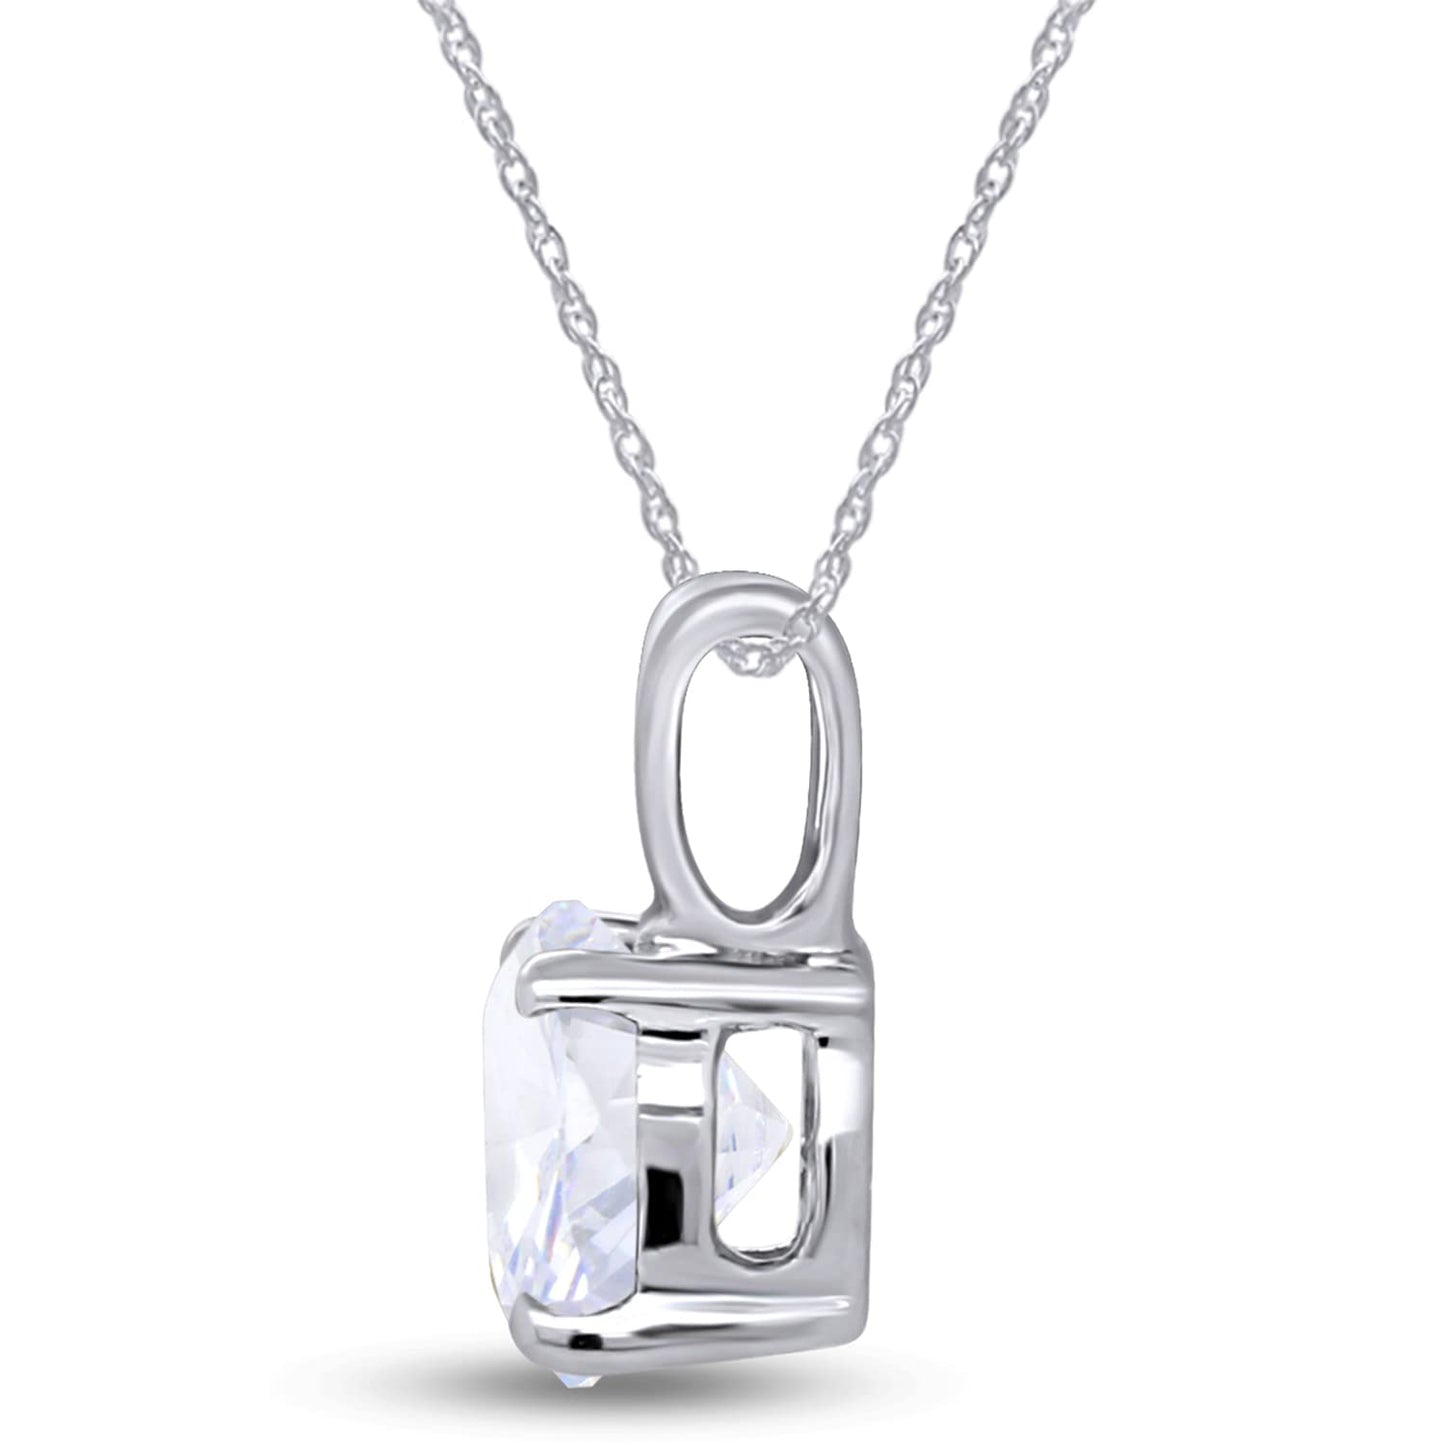 Load image into Gallery viewer, 1 1/2 Carat 7.5MM Lab Created Moissanite Diamond Solitaire Pendant Necklace in 10K or 14K Solid Gold For Women (1.50 Cttw)
